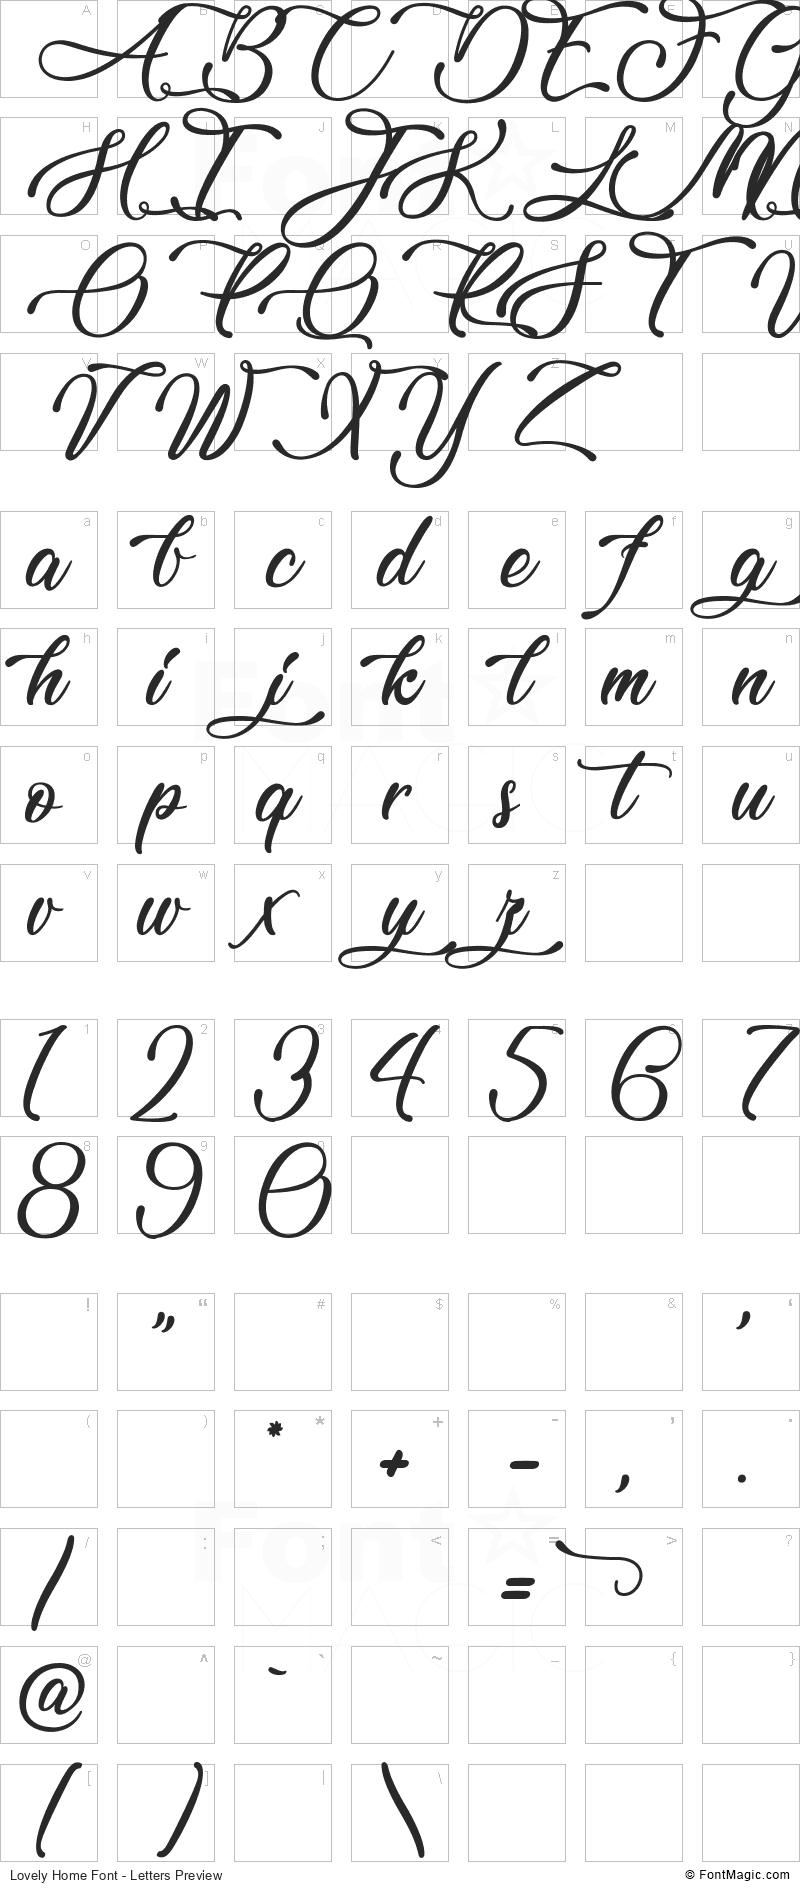 Lovely Home Font - All Latters Preview Chart